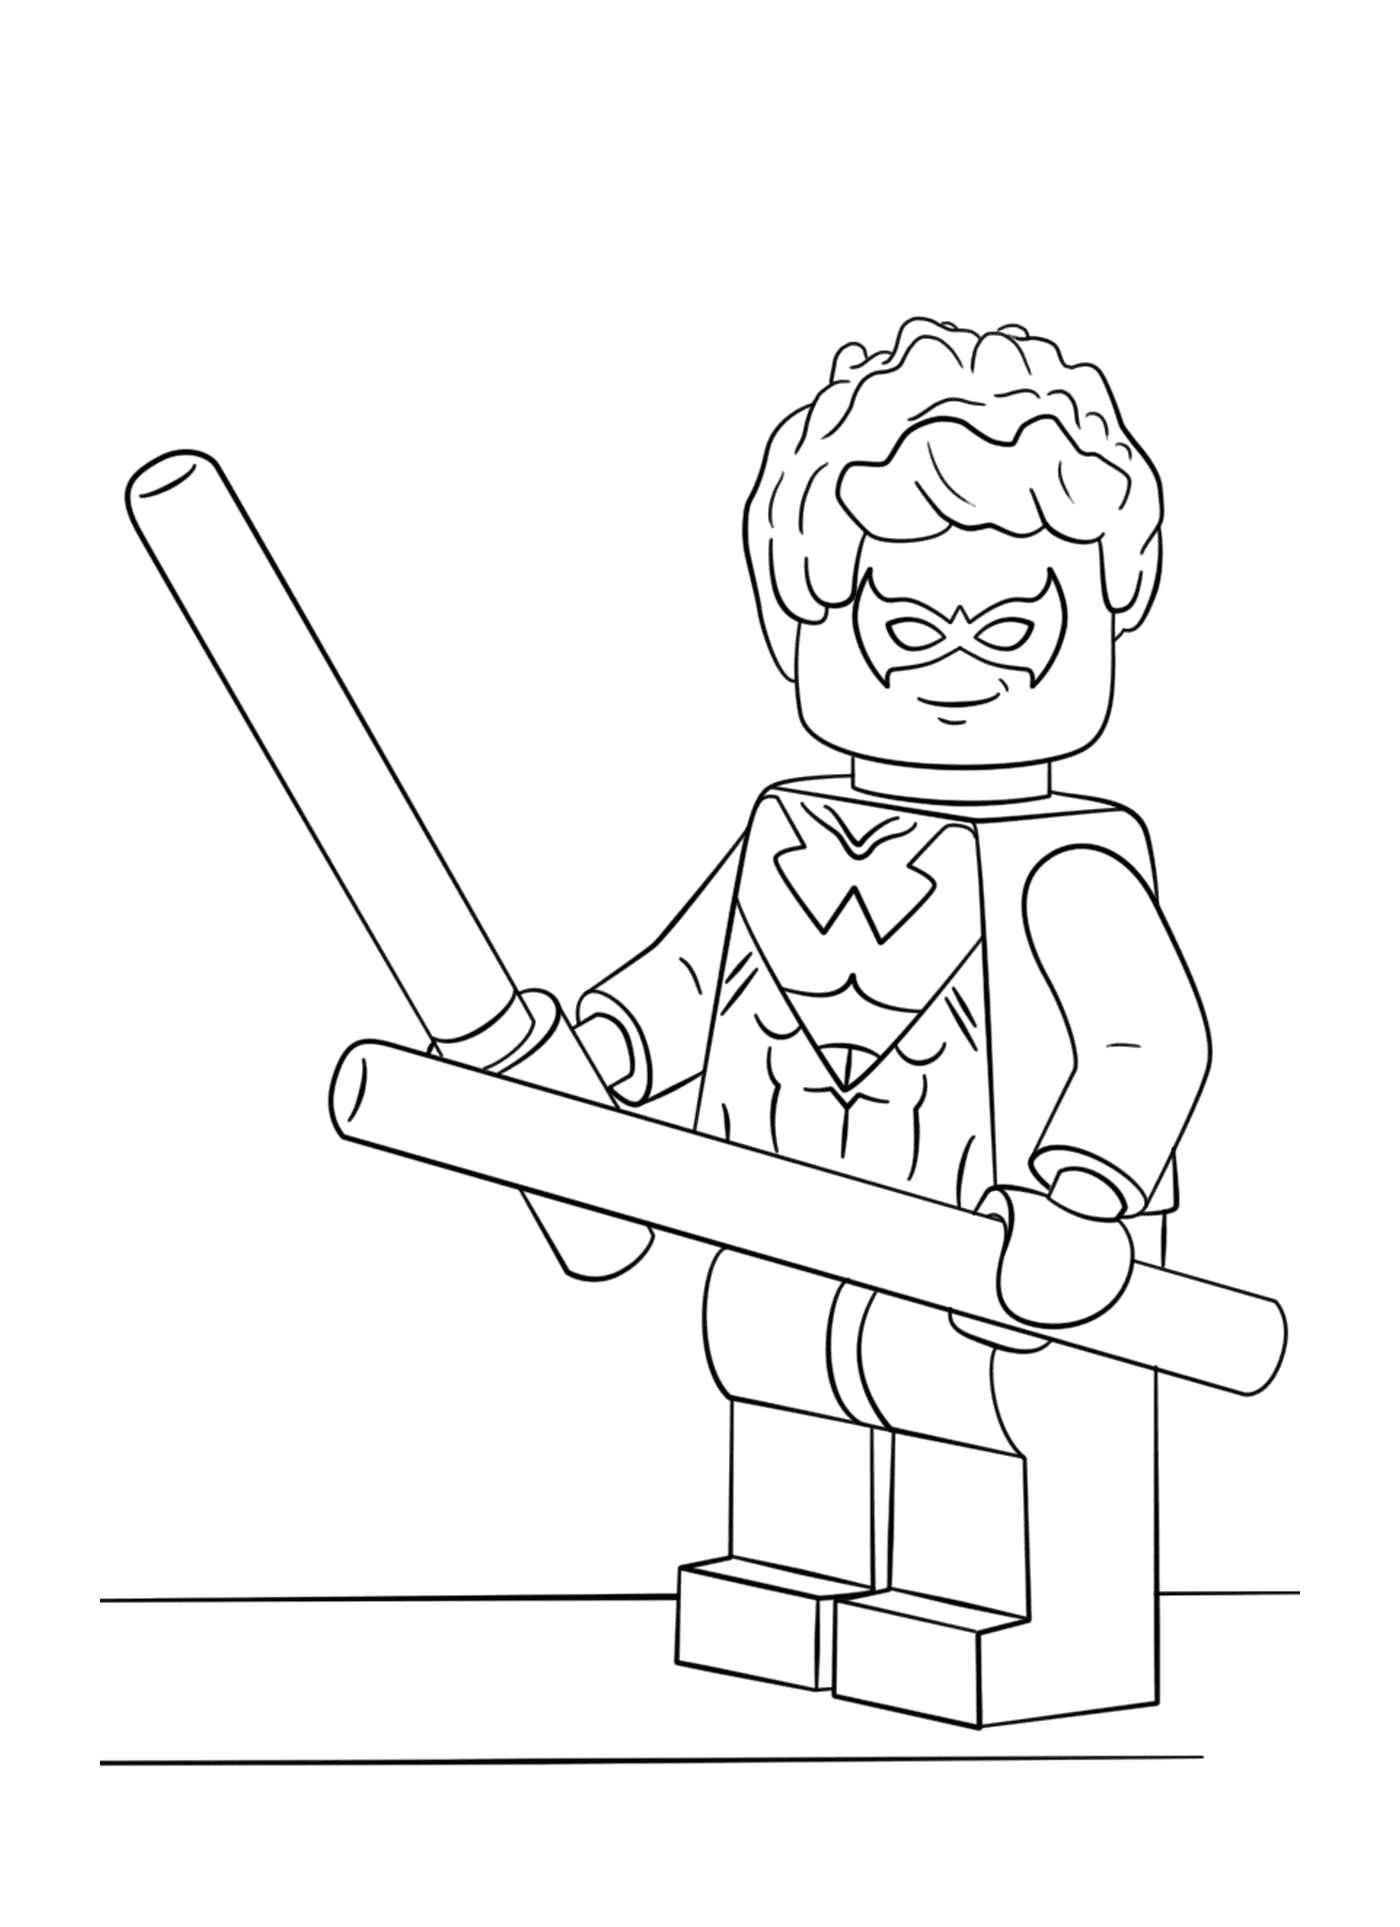  Nightwing, a Lego character 